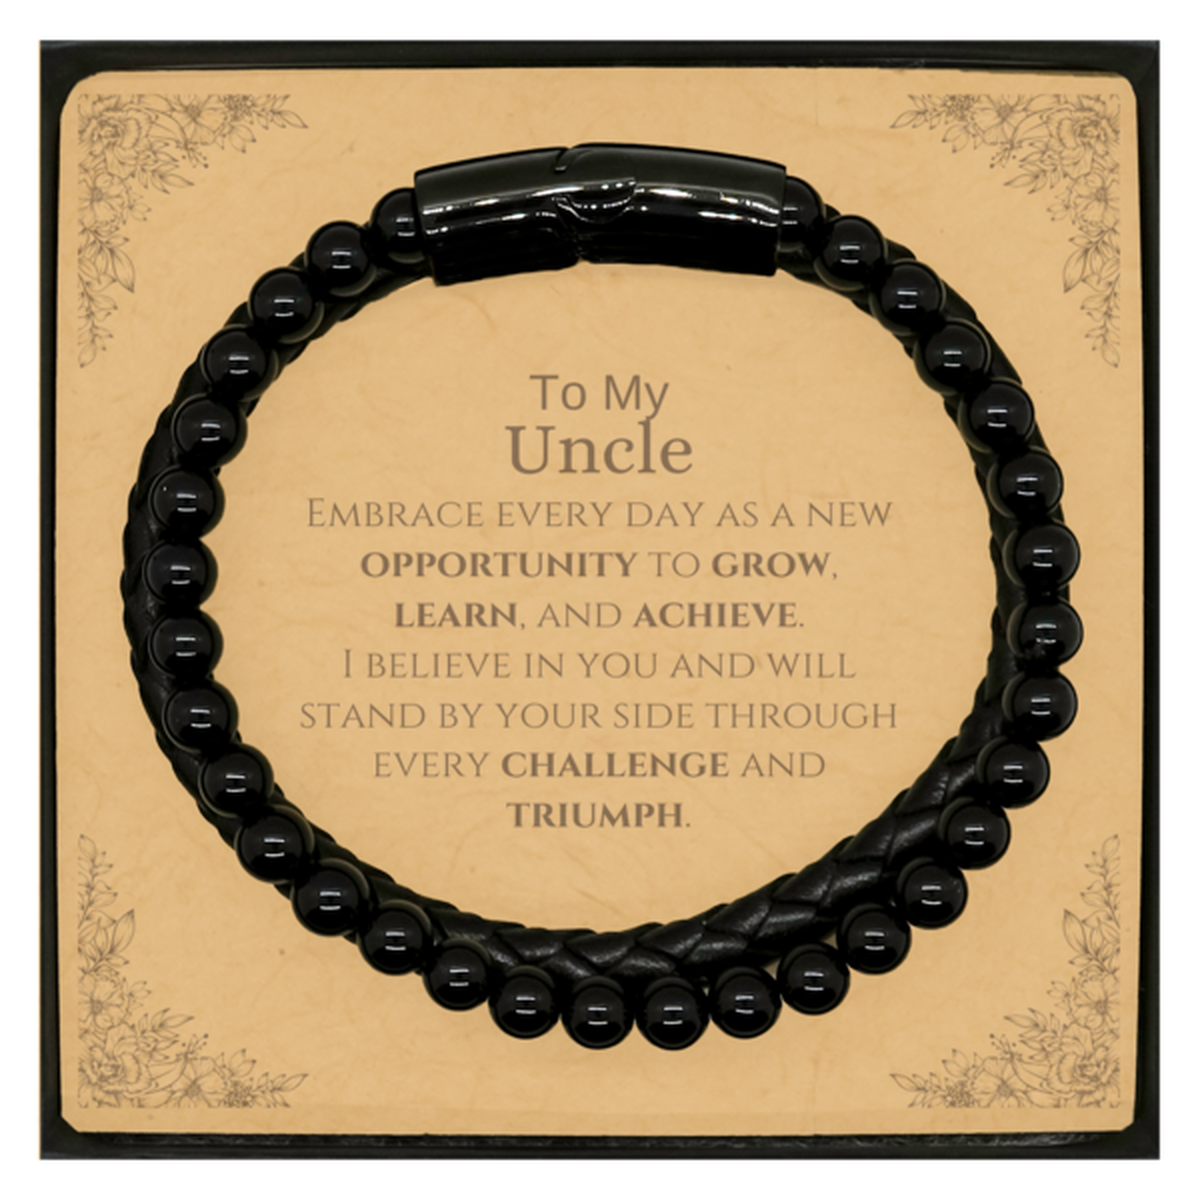 To My Uncle Gifts, I believe in you and will stand by your side, Inspirational Stone Leather Bracelets For Uncle, Birthday Christmas Motivational Uncle Gifts